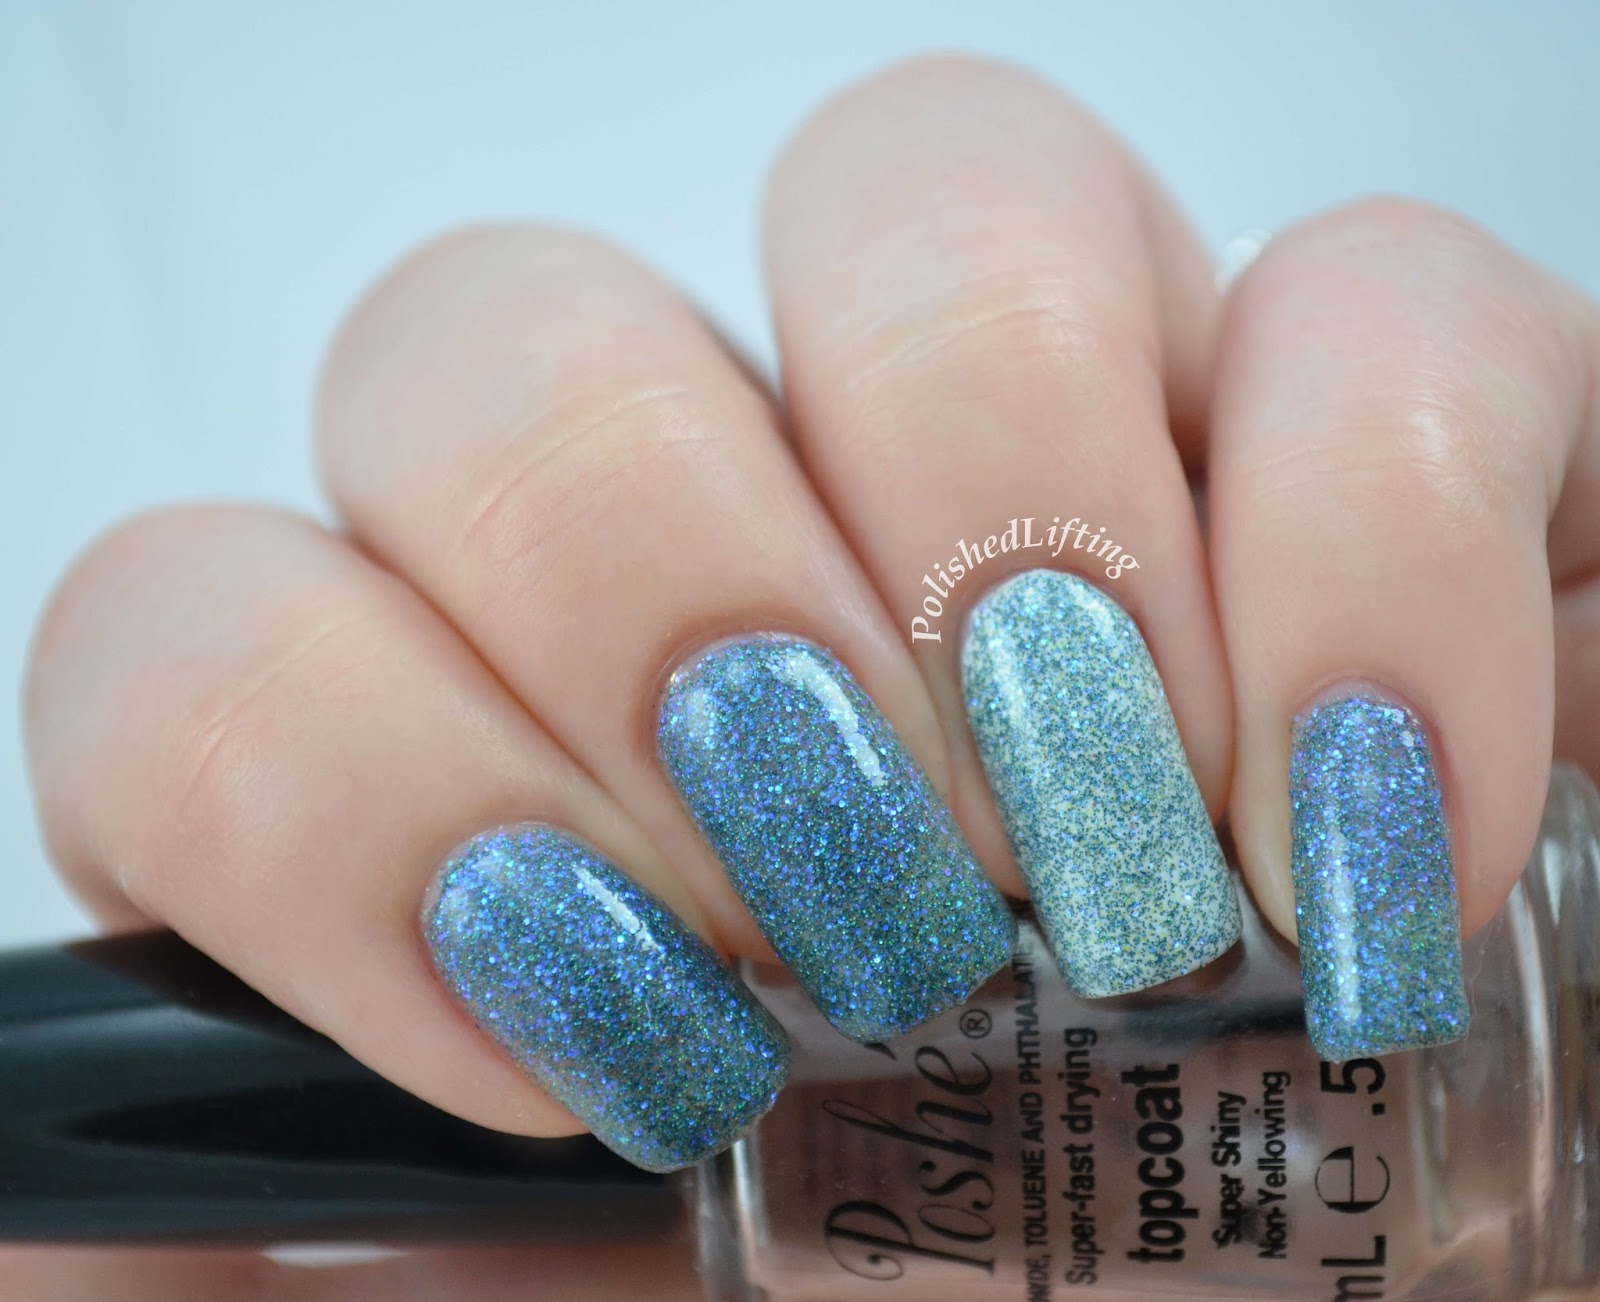 Reverie Nail Lacquer Mermaid Scales Summer 2014